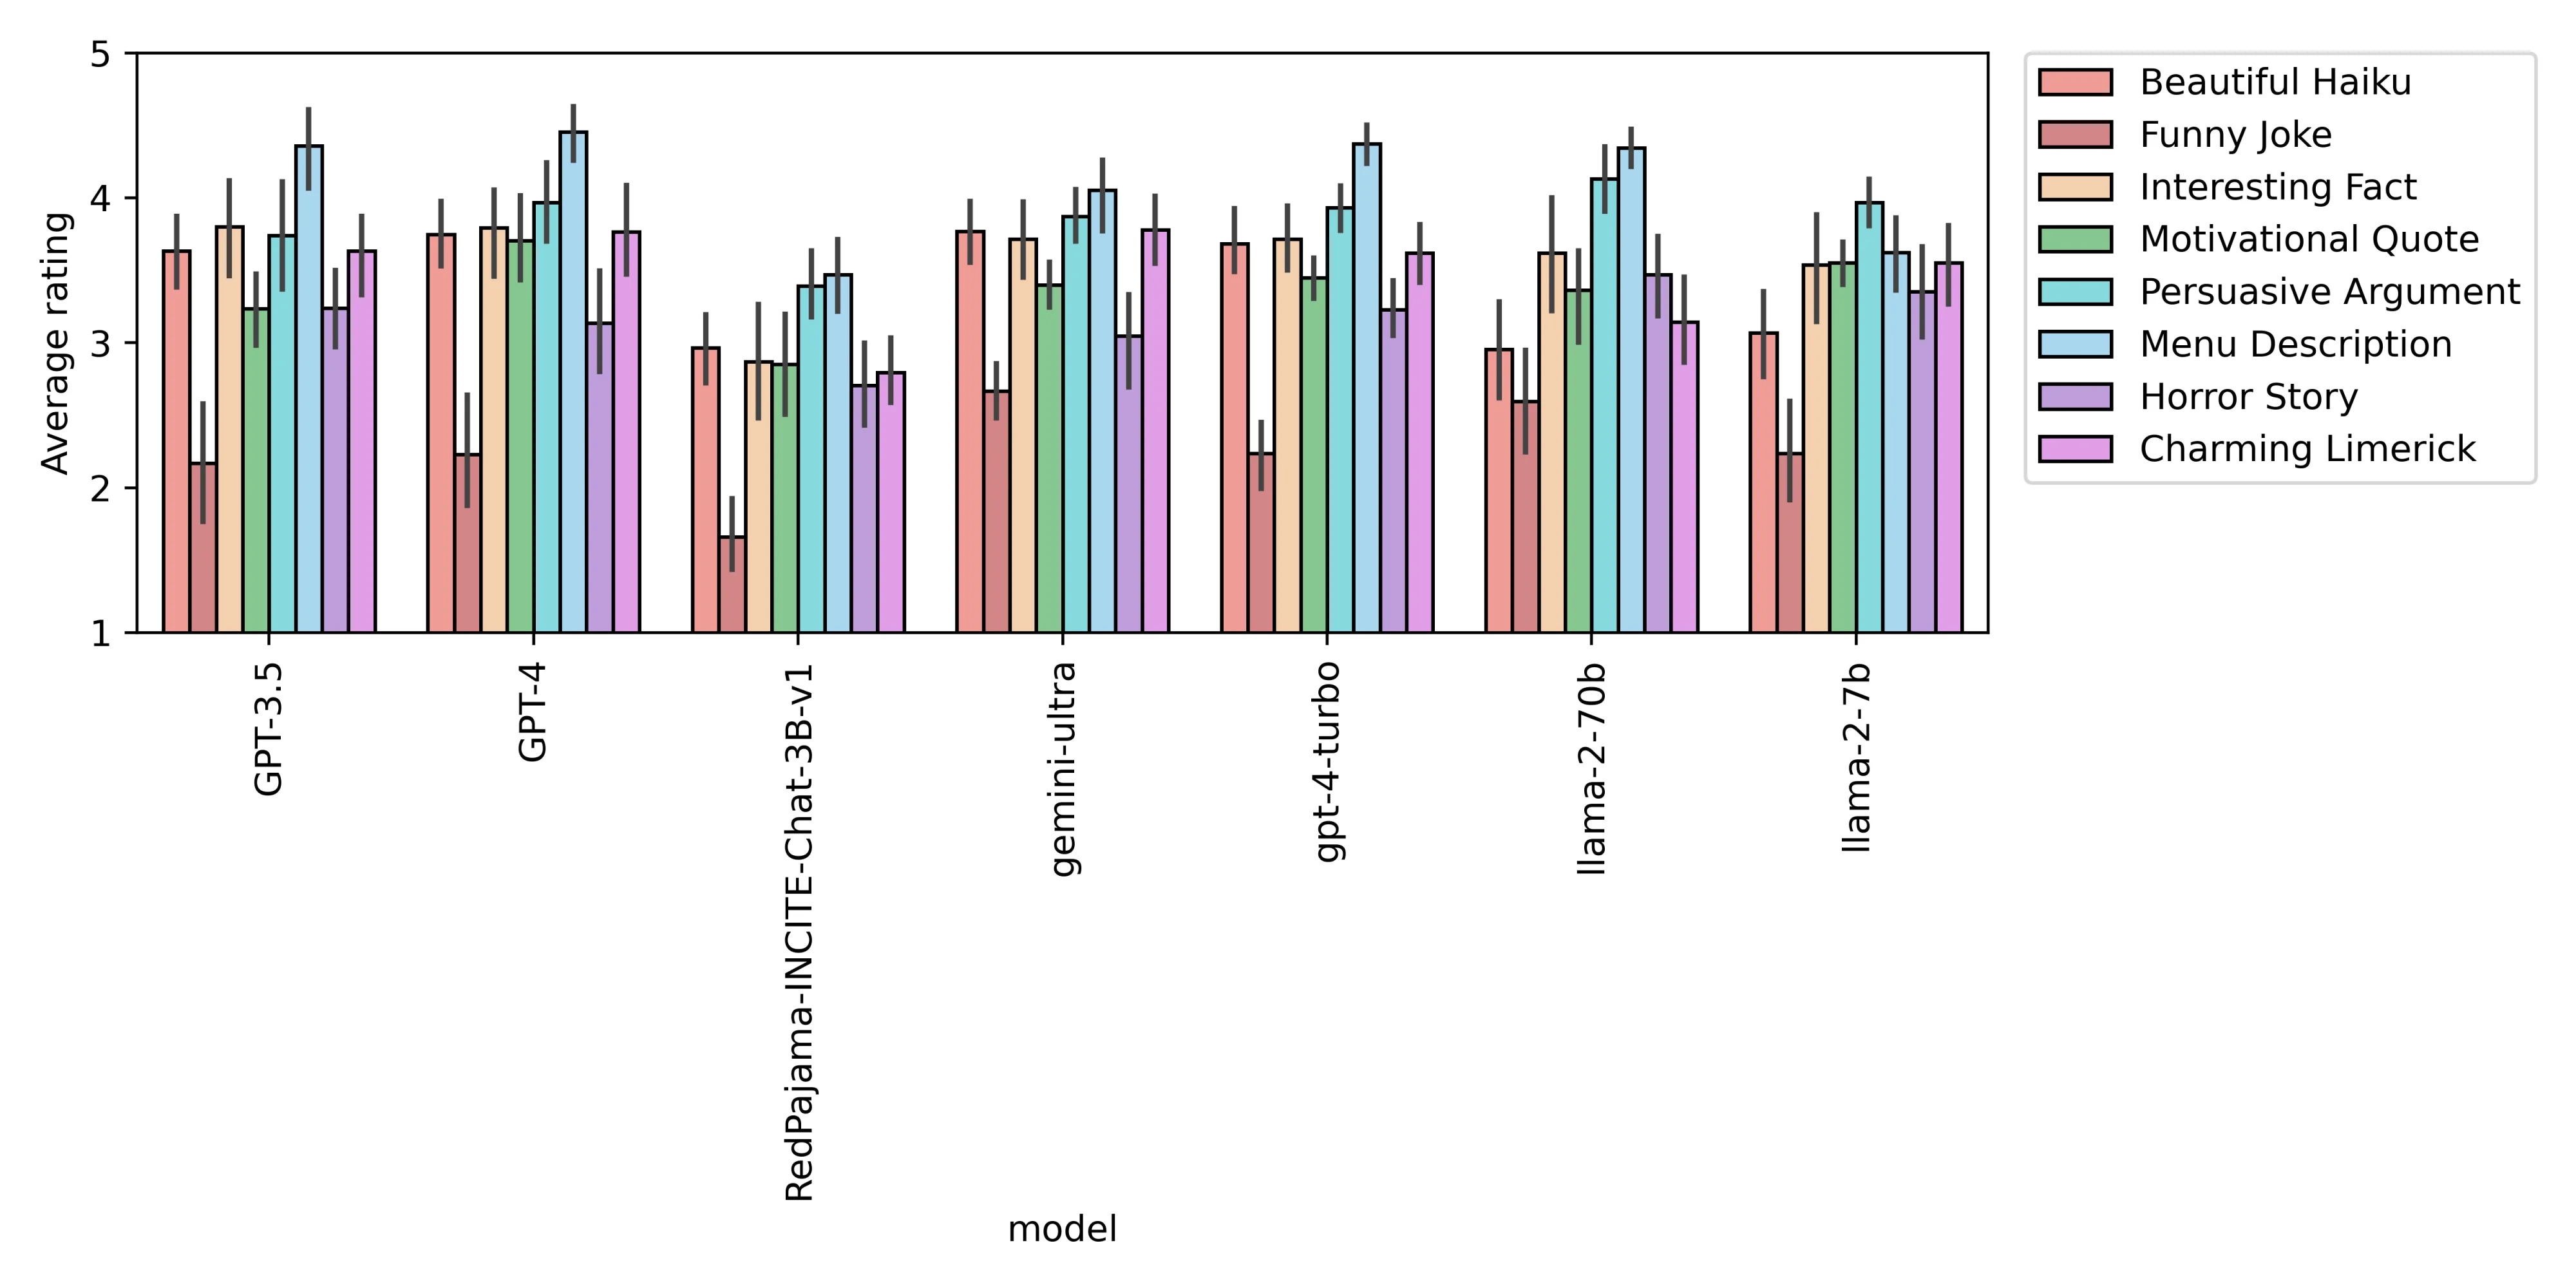 Average ratings for each task, aggregated by model